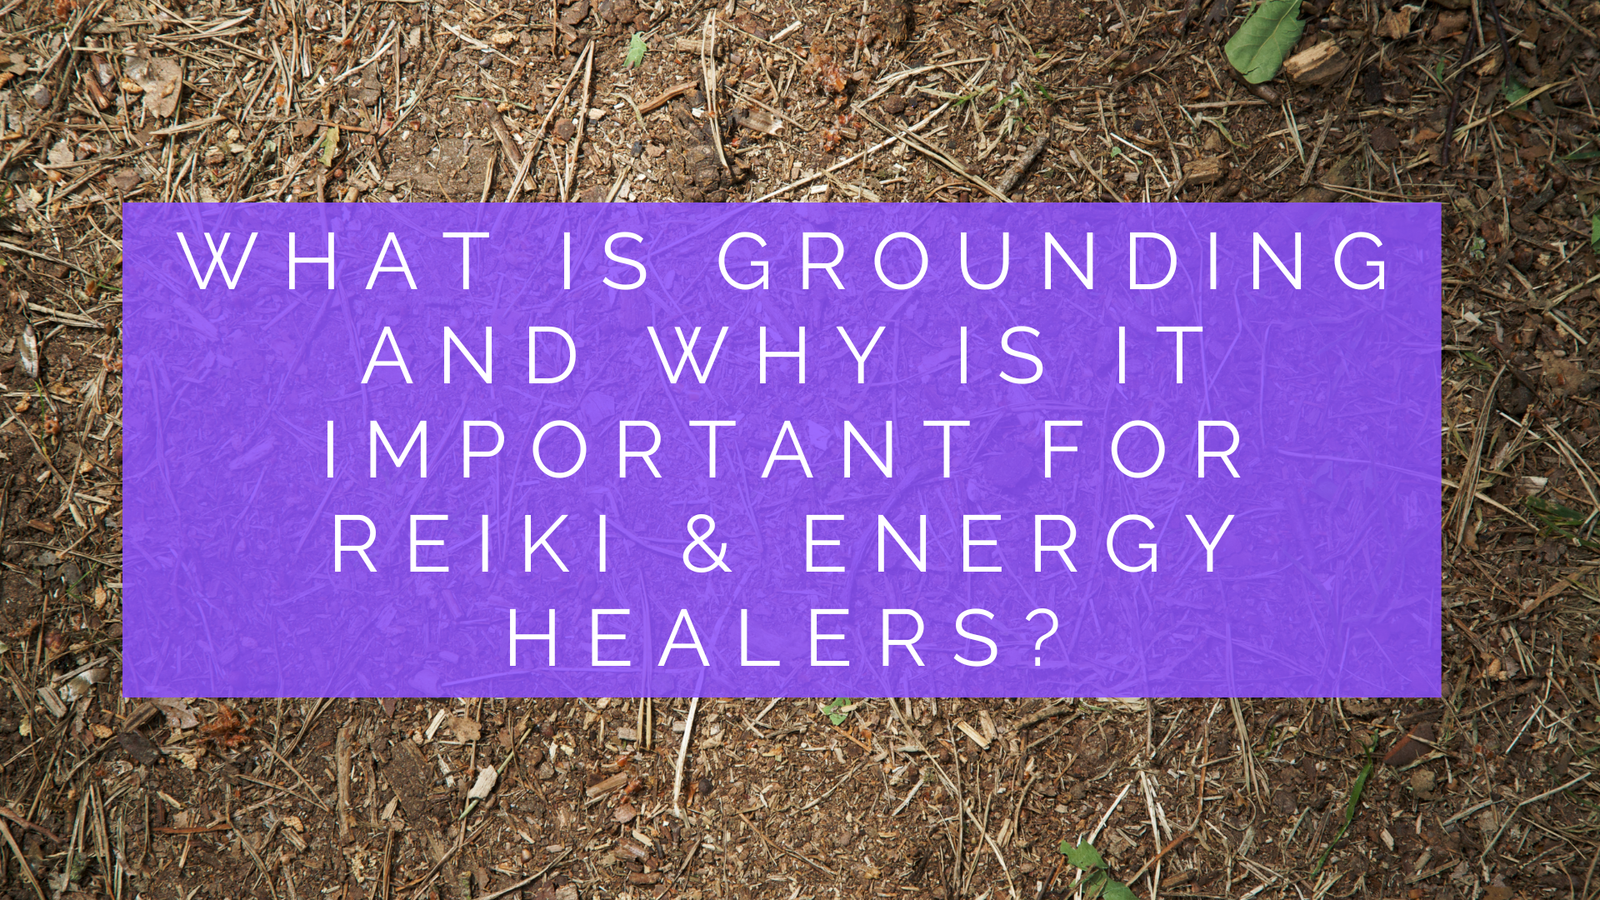 What is grounding and why is it important for Reiki & Energy healers?